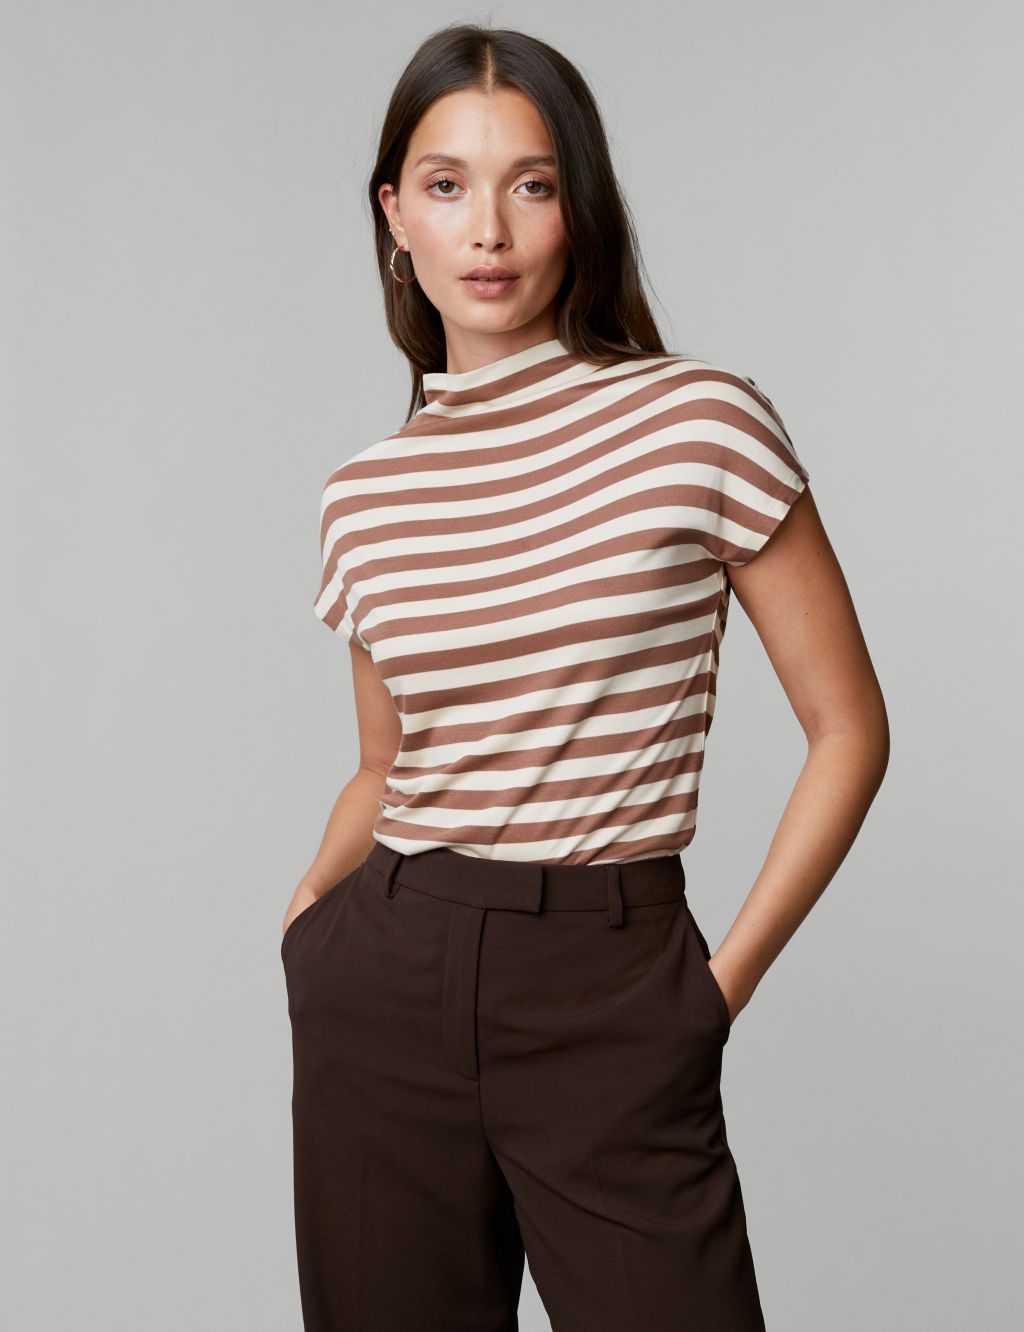 Jersey Striped Top image 4